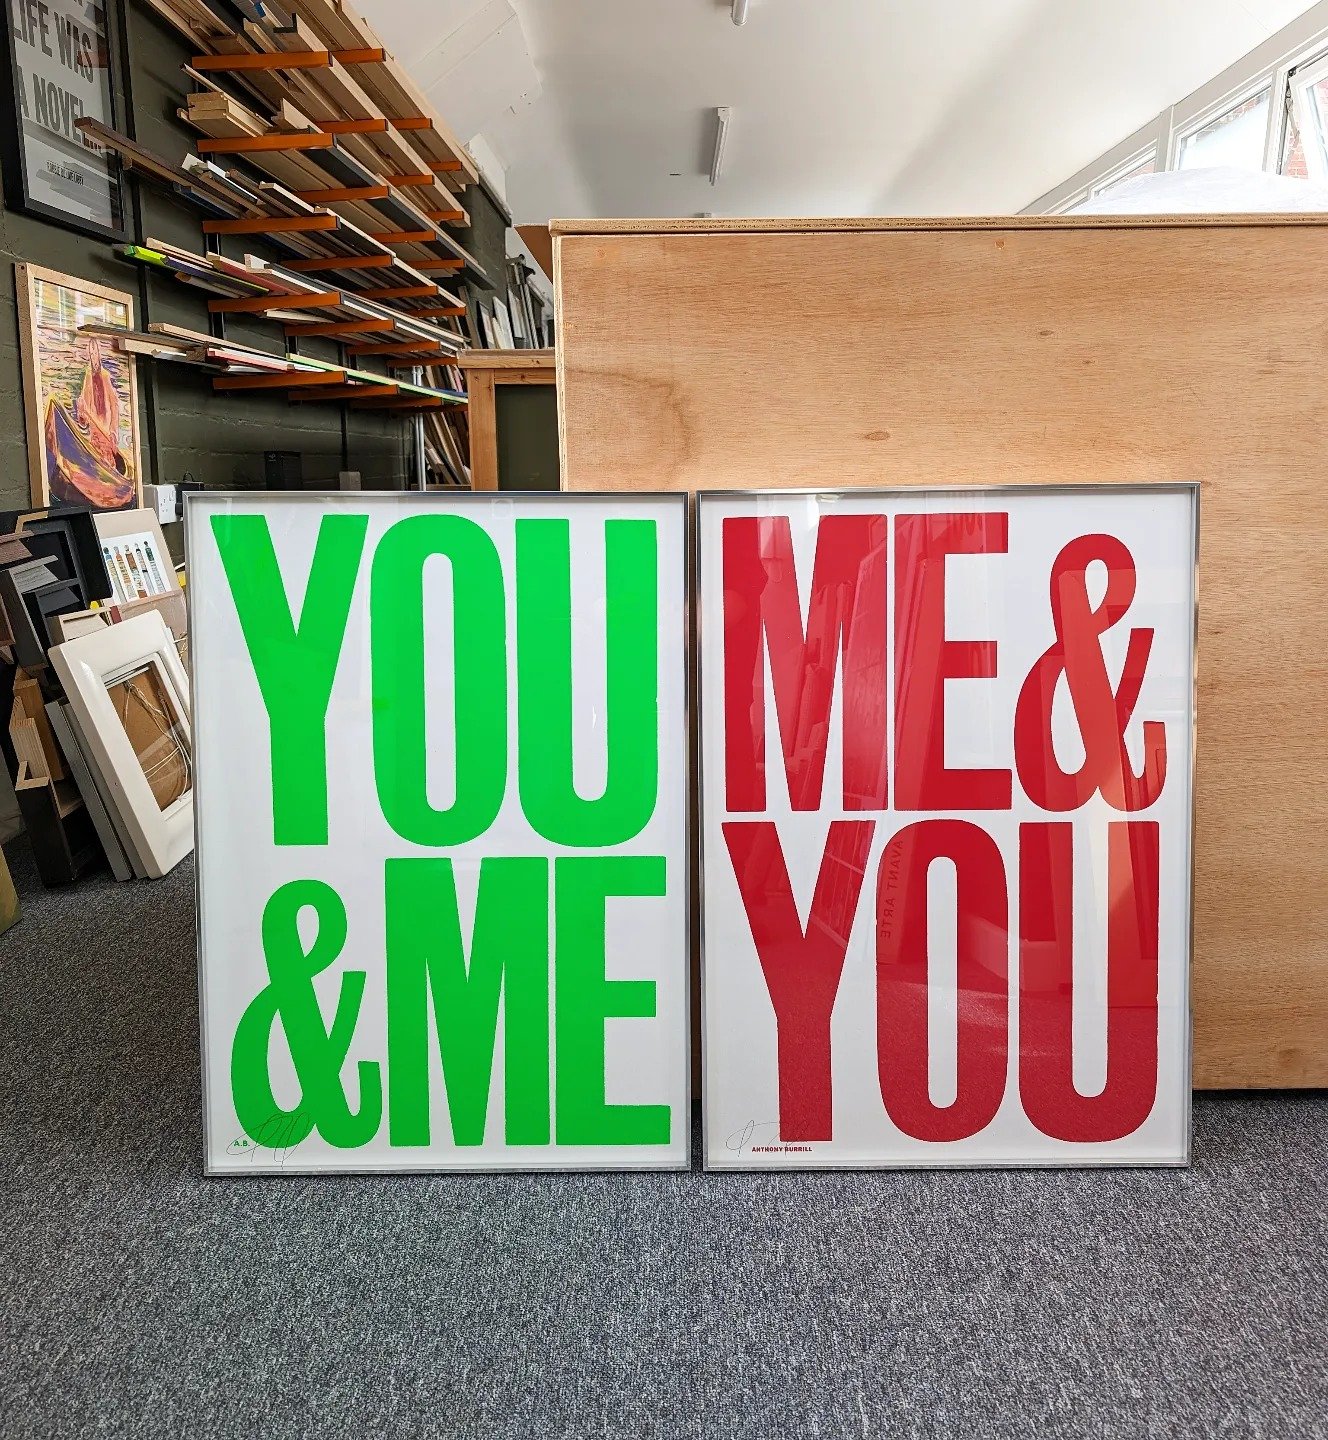 ANTHONY BURRILL - what a pair.
Polished silver aluminium frames. If you're looking for a super slim profile - 5 to 7mm on the face - aluminium frames can be a great solution. Lots of different options, including real wood veneers.
.
#aluminium #metal